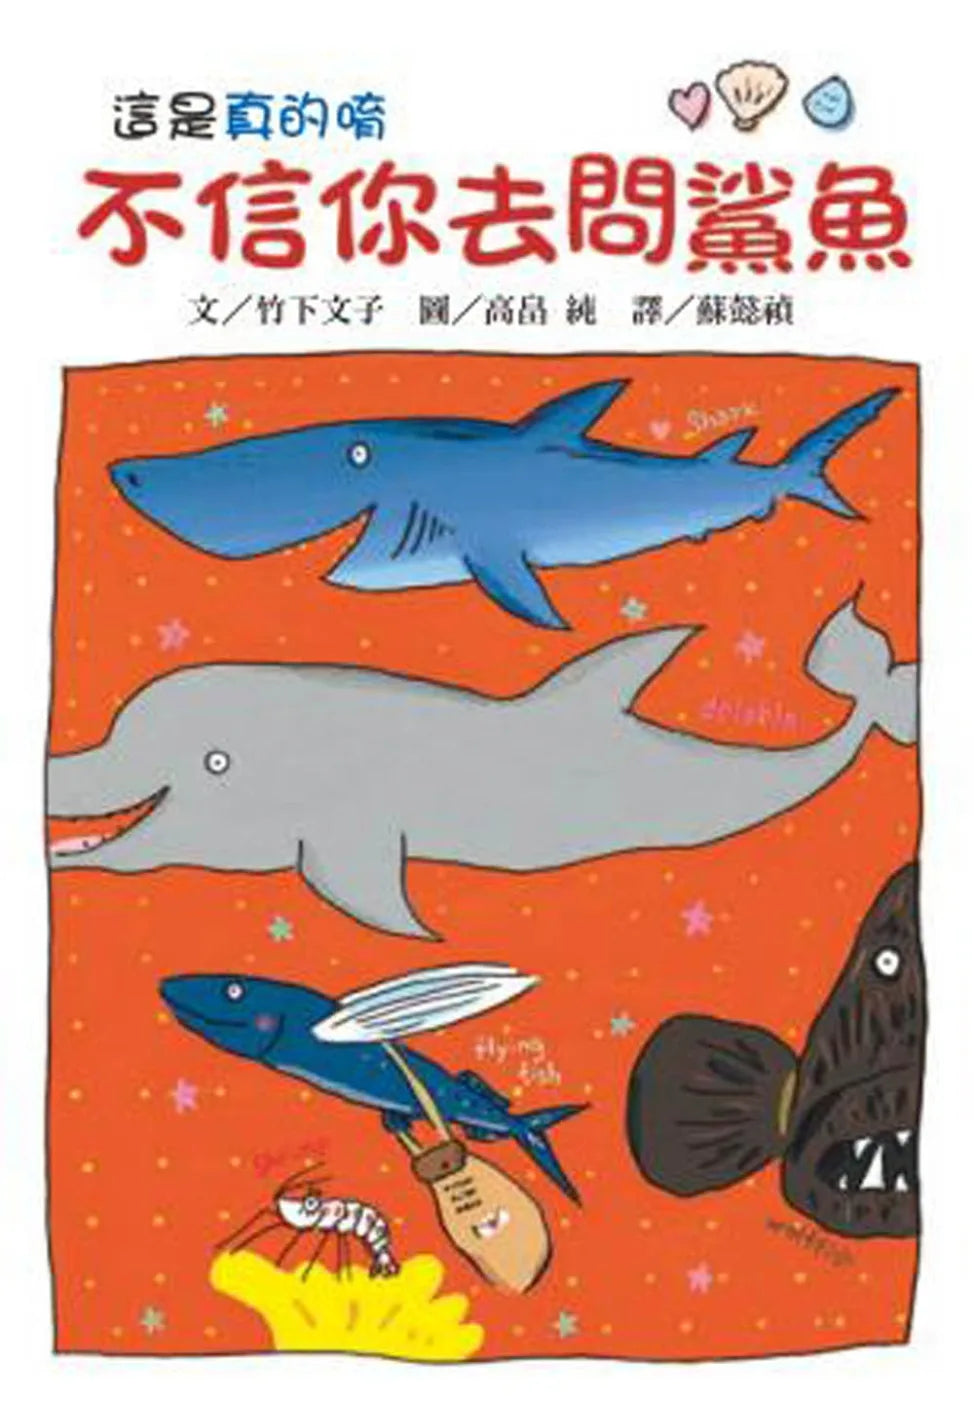 Don't Believe Me? Ask the Shark! • 不信你去問鯊魚